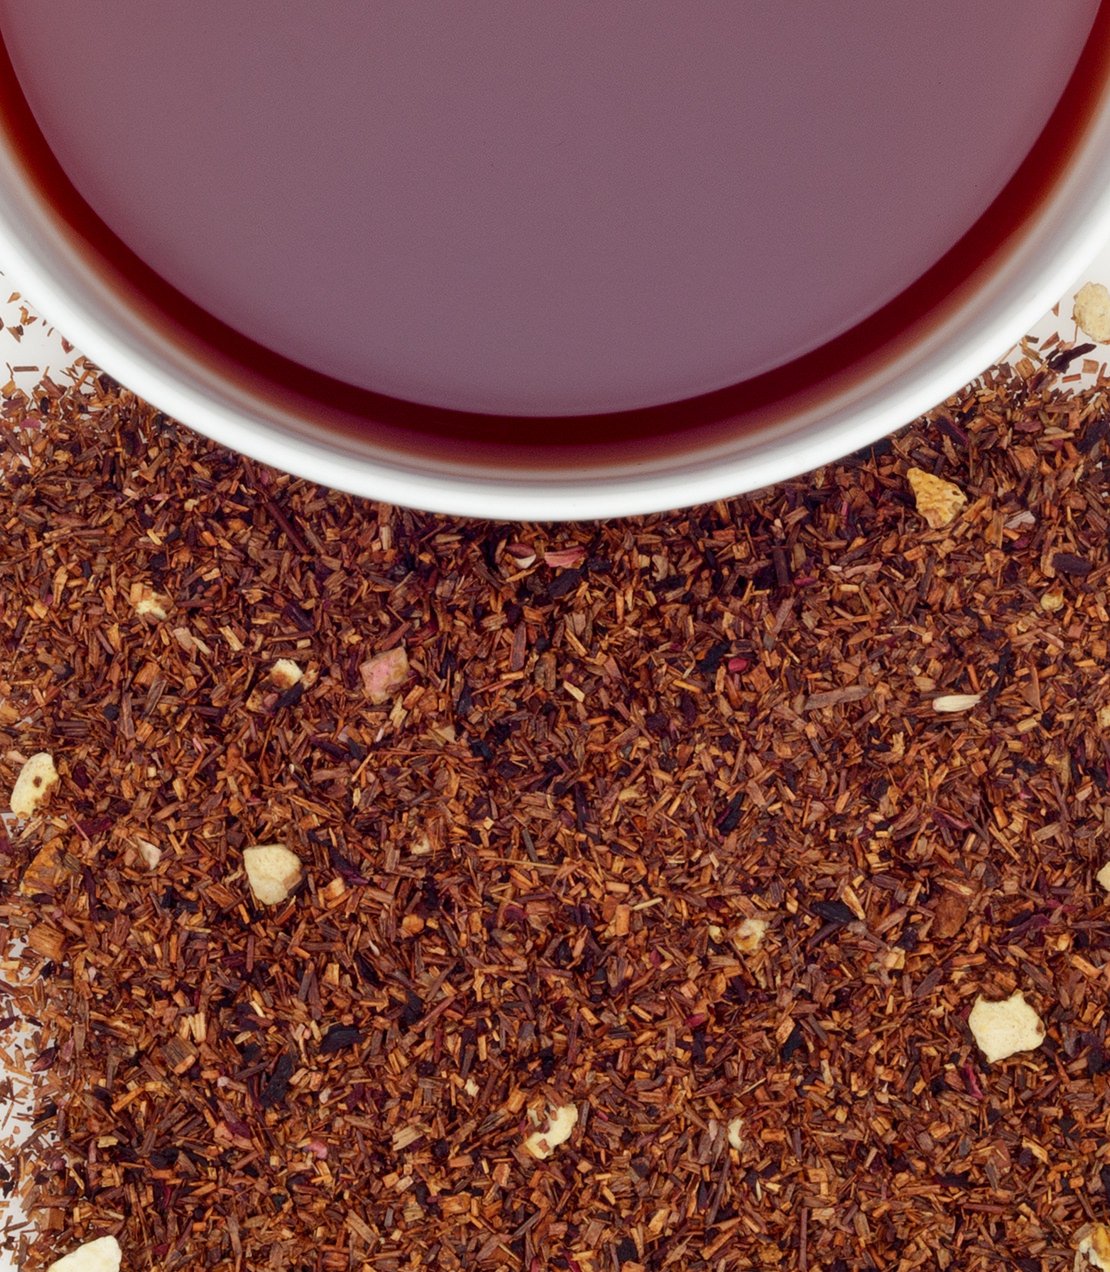 Rooibos flavoured with orange and cranberry - Caffeine-free - African Autumn by Harney & Sons Fine Teas Europe